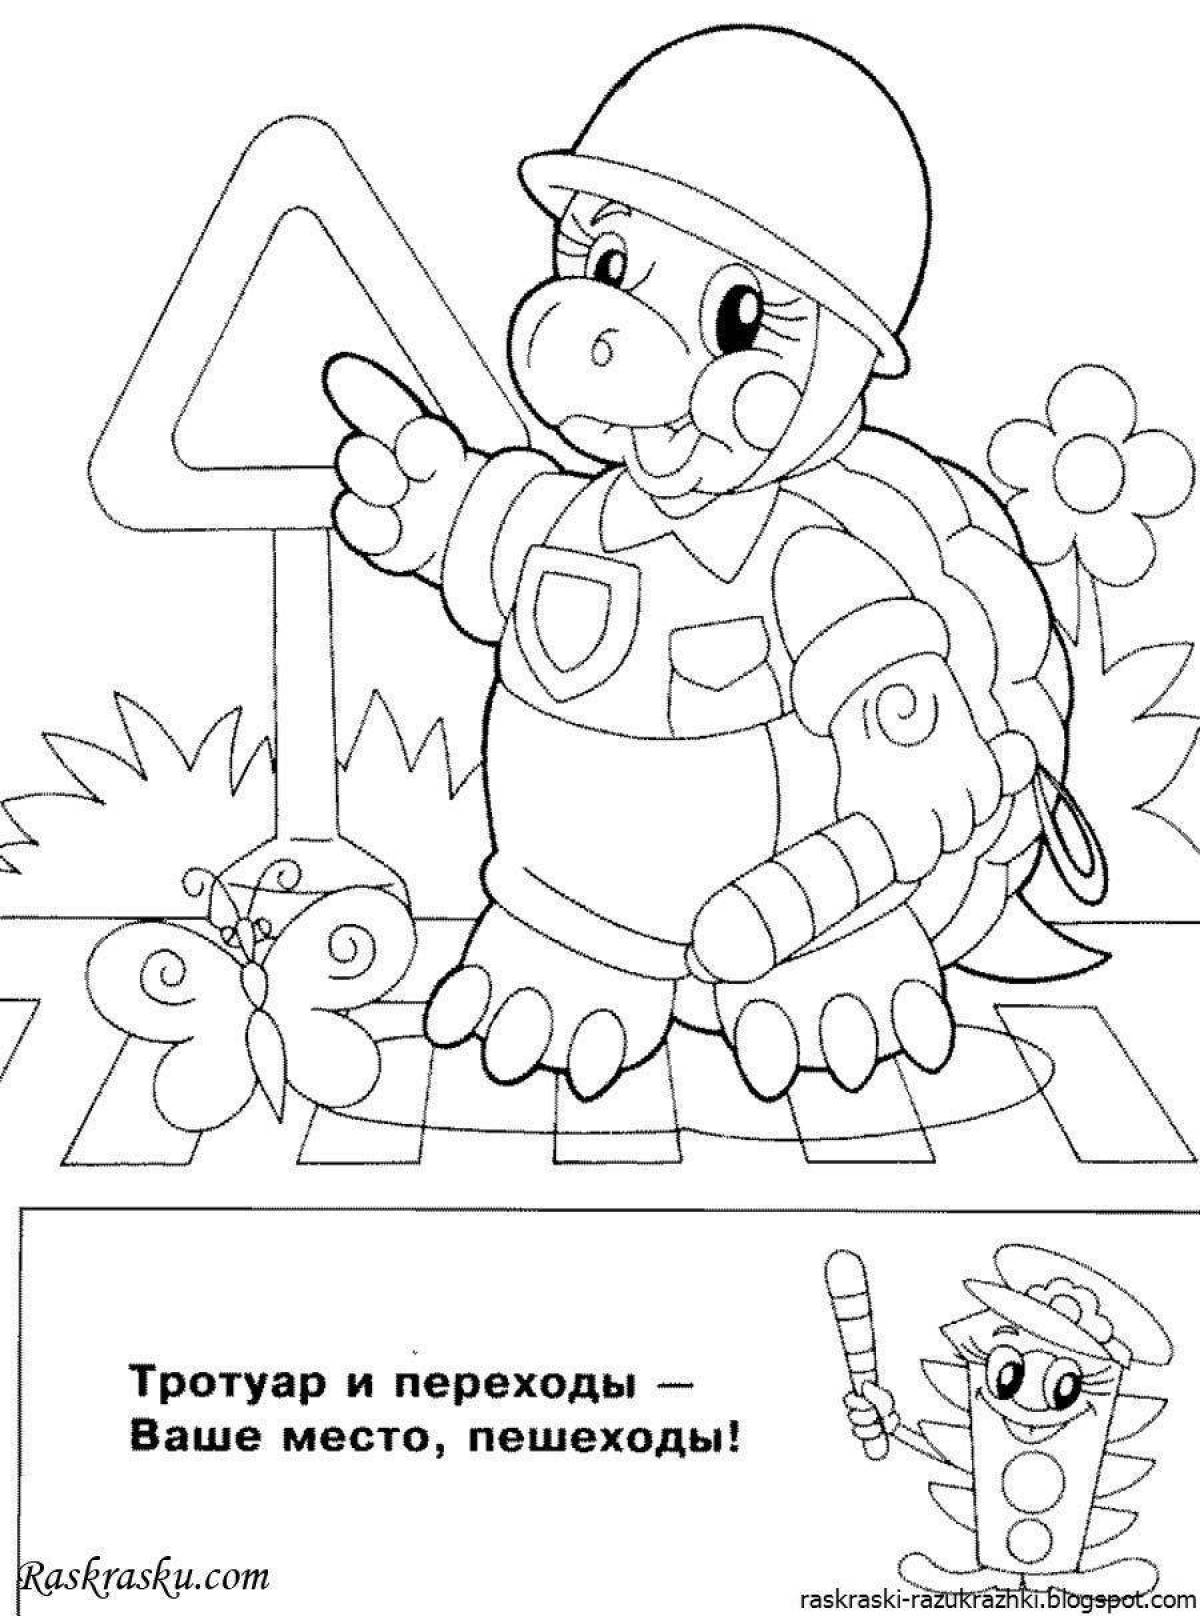 Traffic safety coloring book for kids